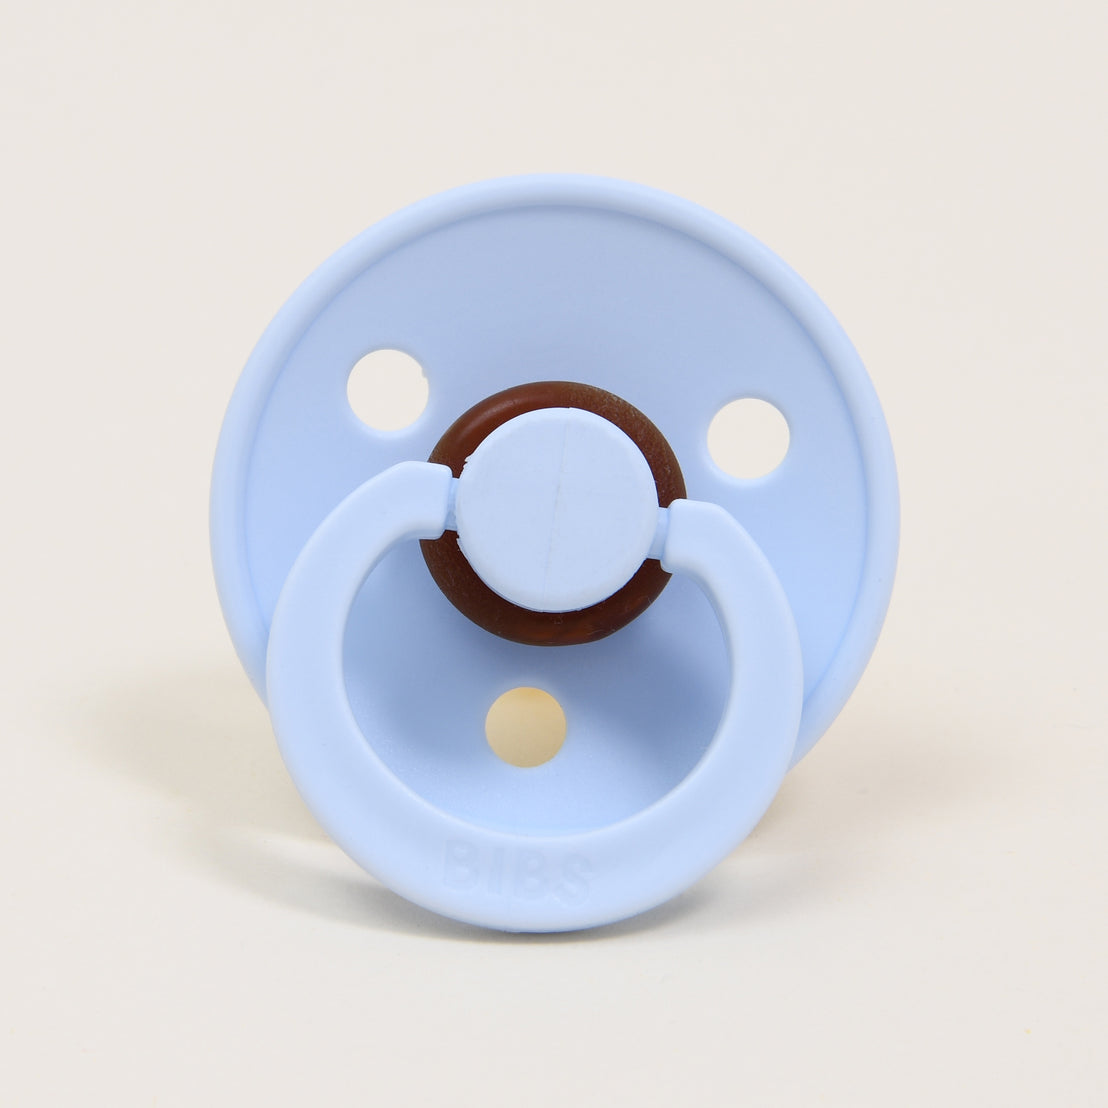 A closeup of a Bibs pacifier in Baby Blue, part of the Harrison Pacifier Set.